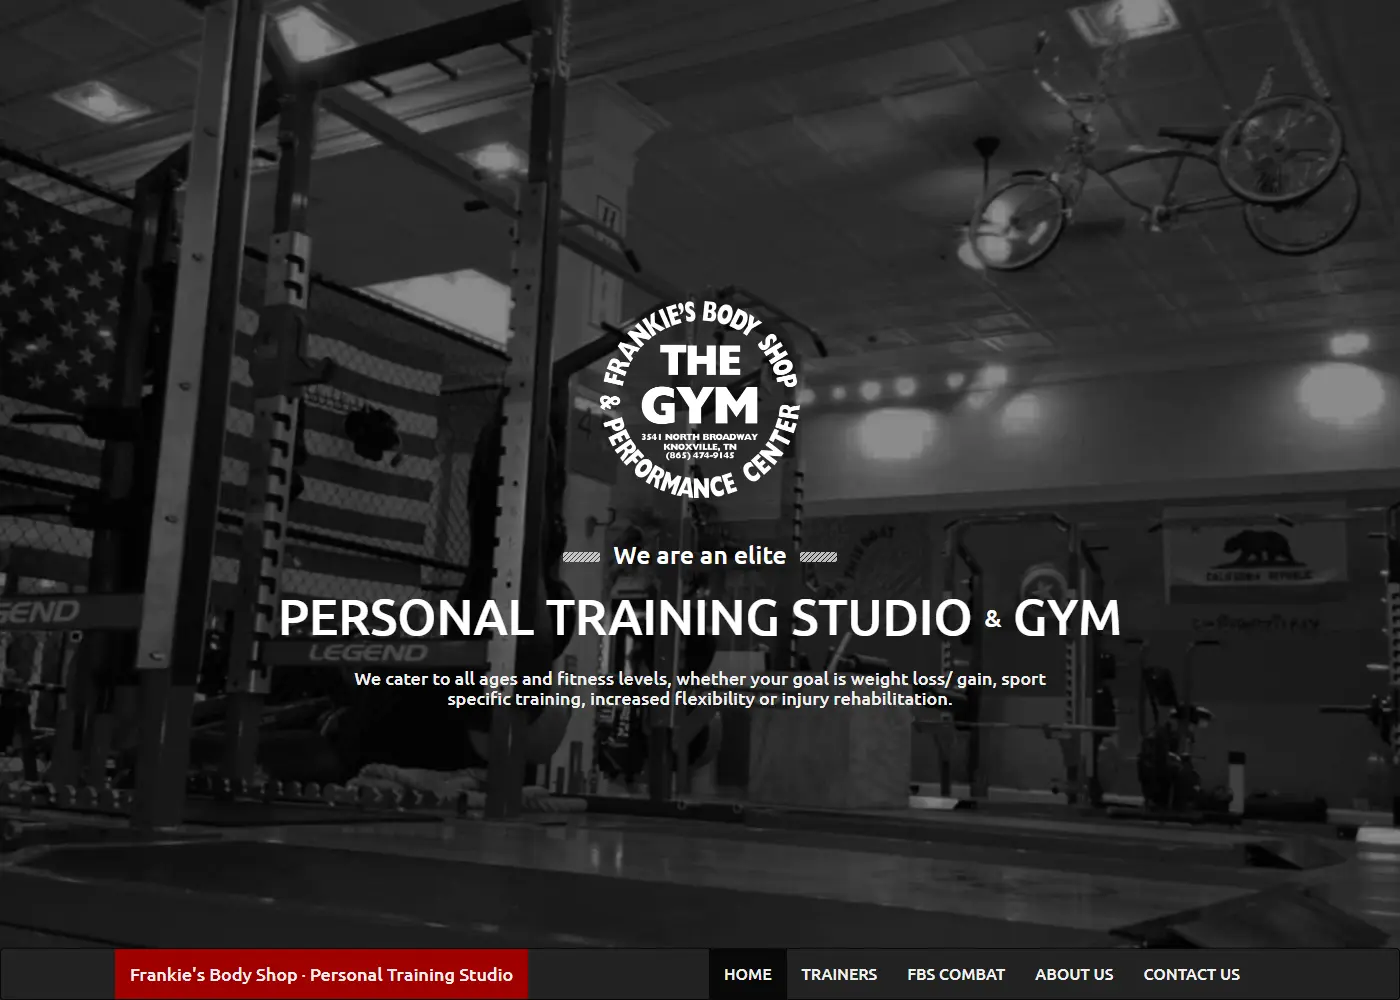 Homepage of website with photo of gym with logo and marketing text.